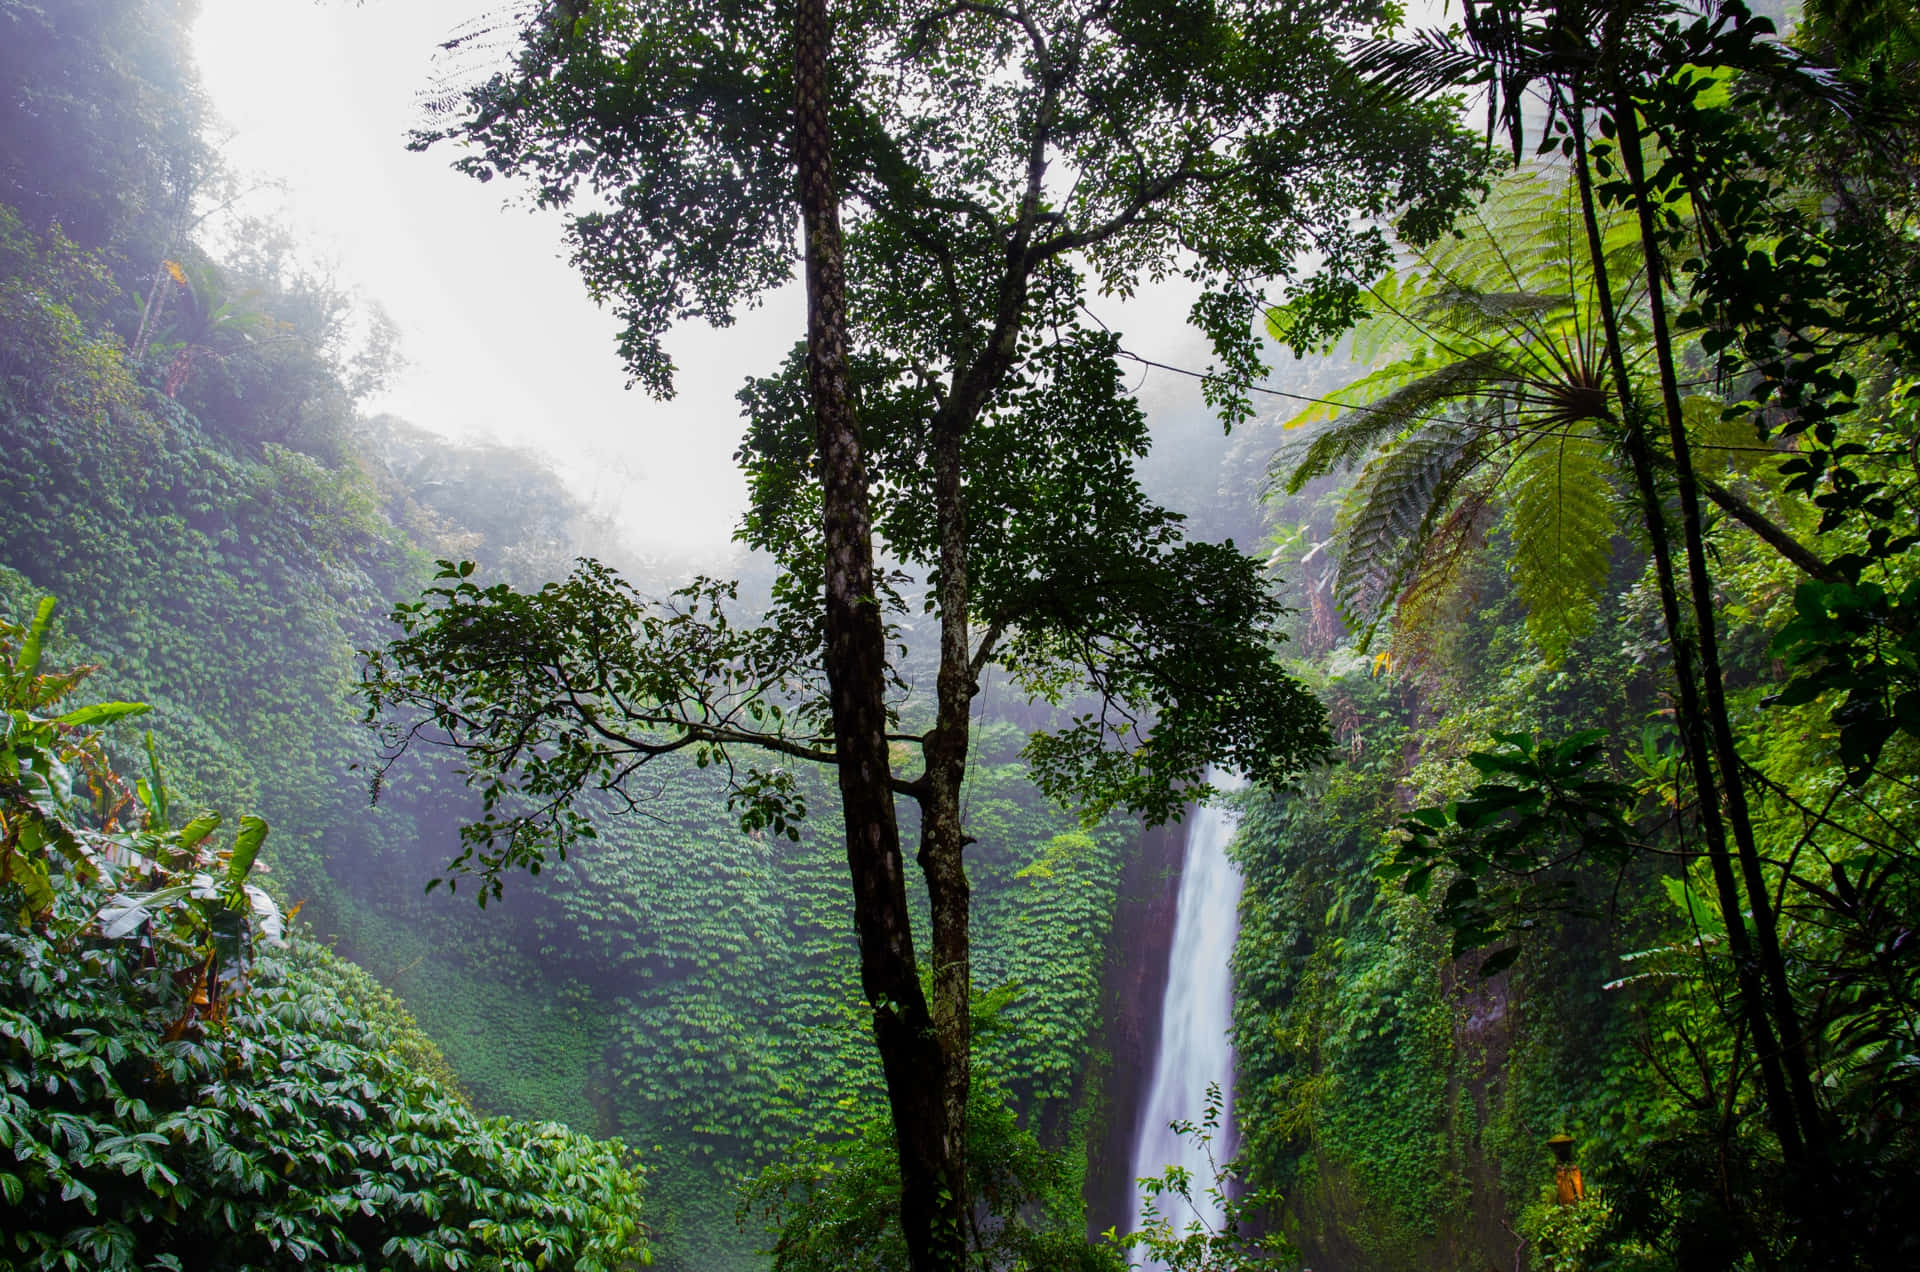 Explore the mysterious beauty of the jungle